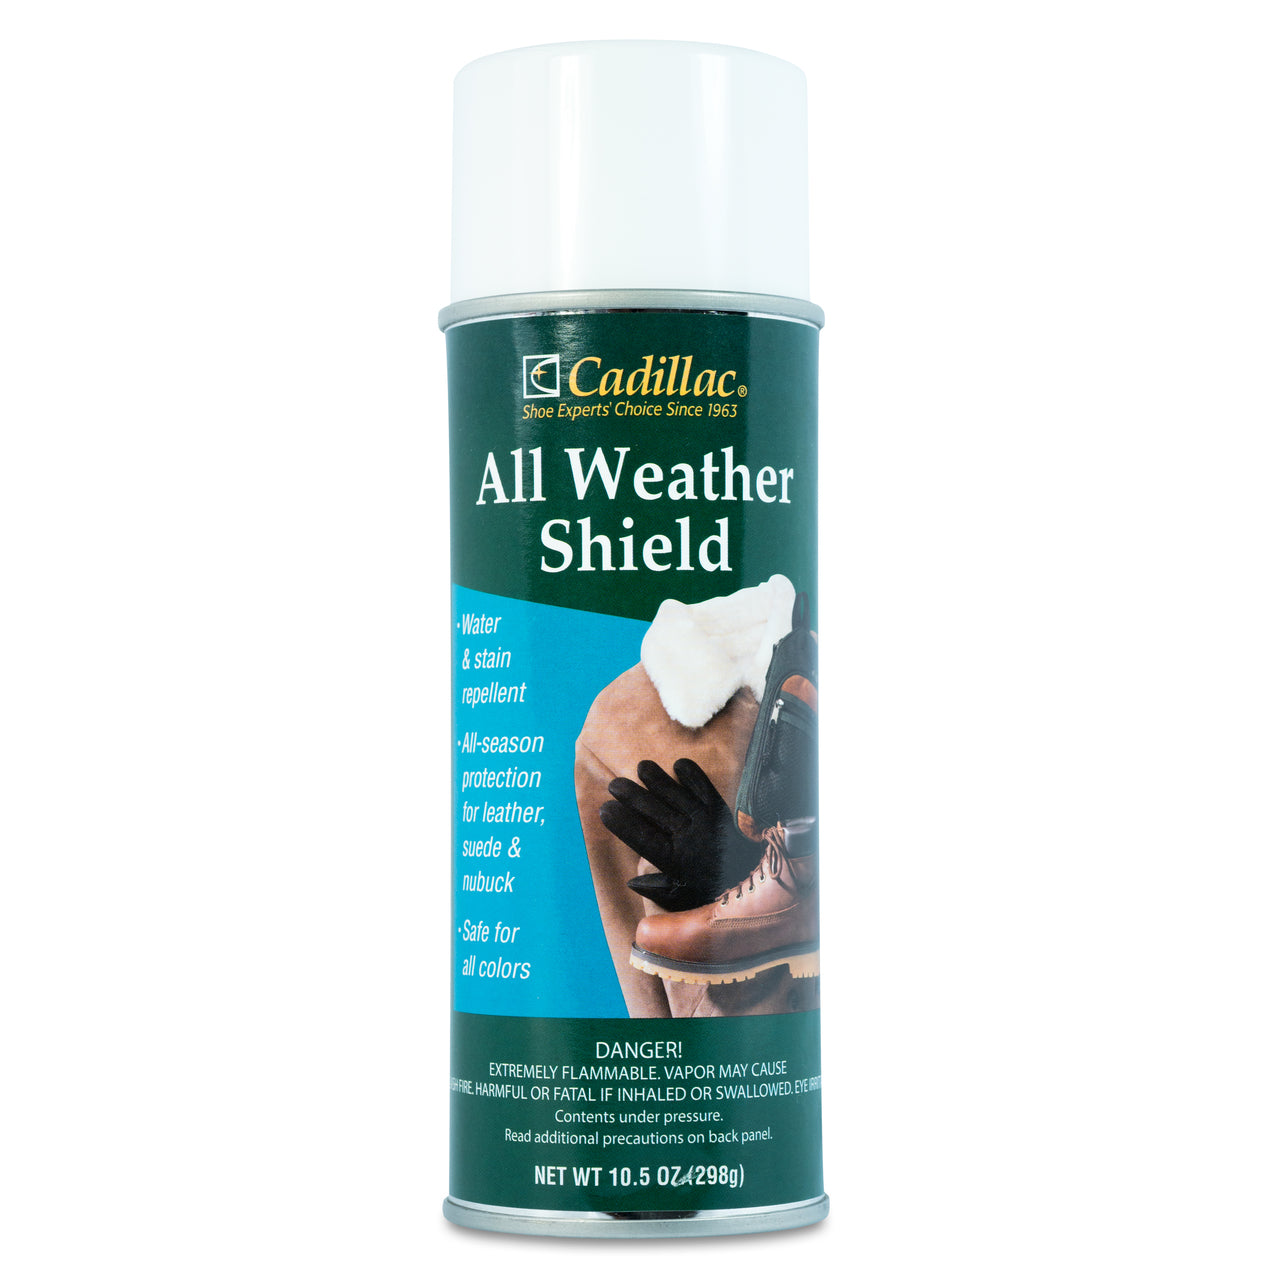 All Weather Shield